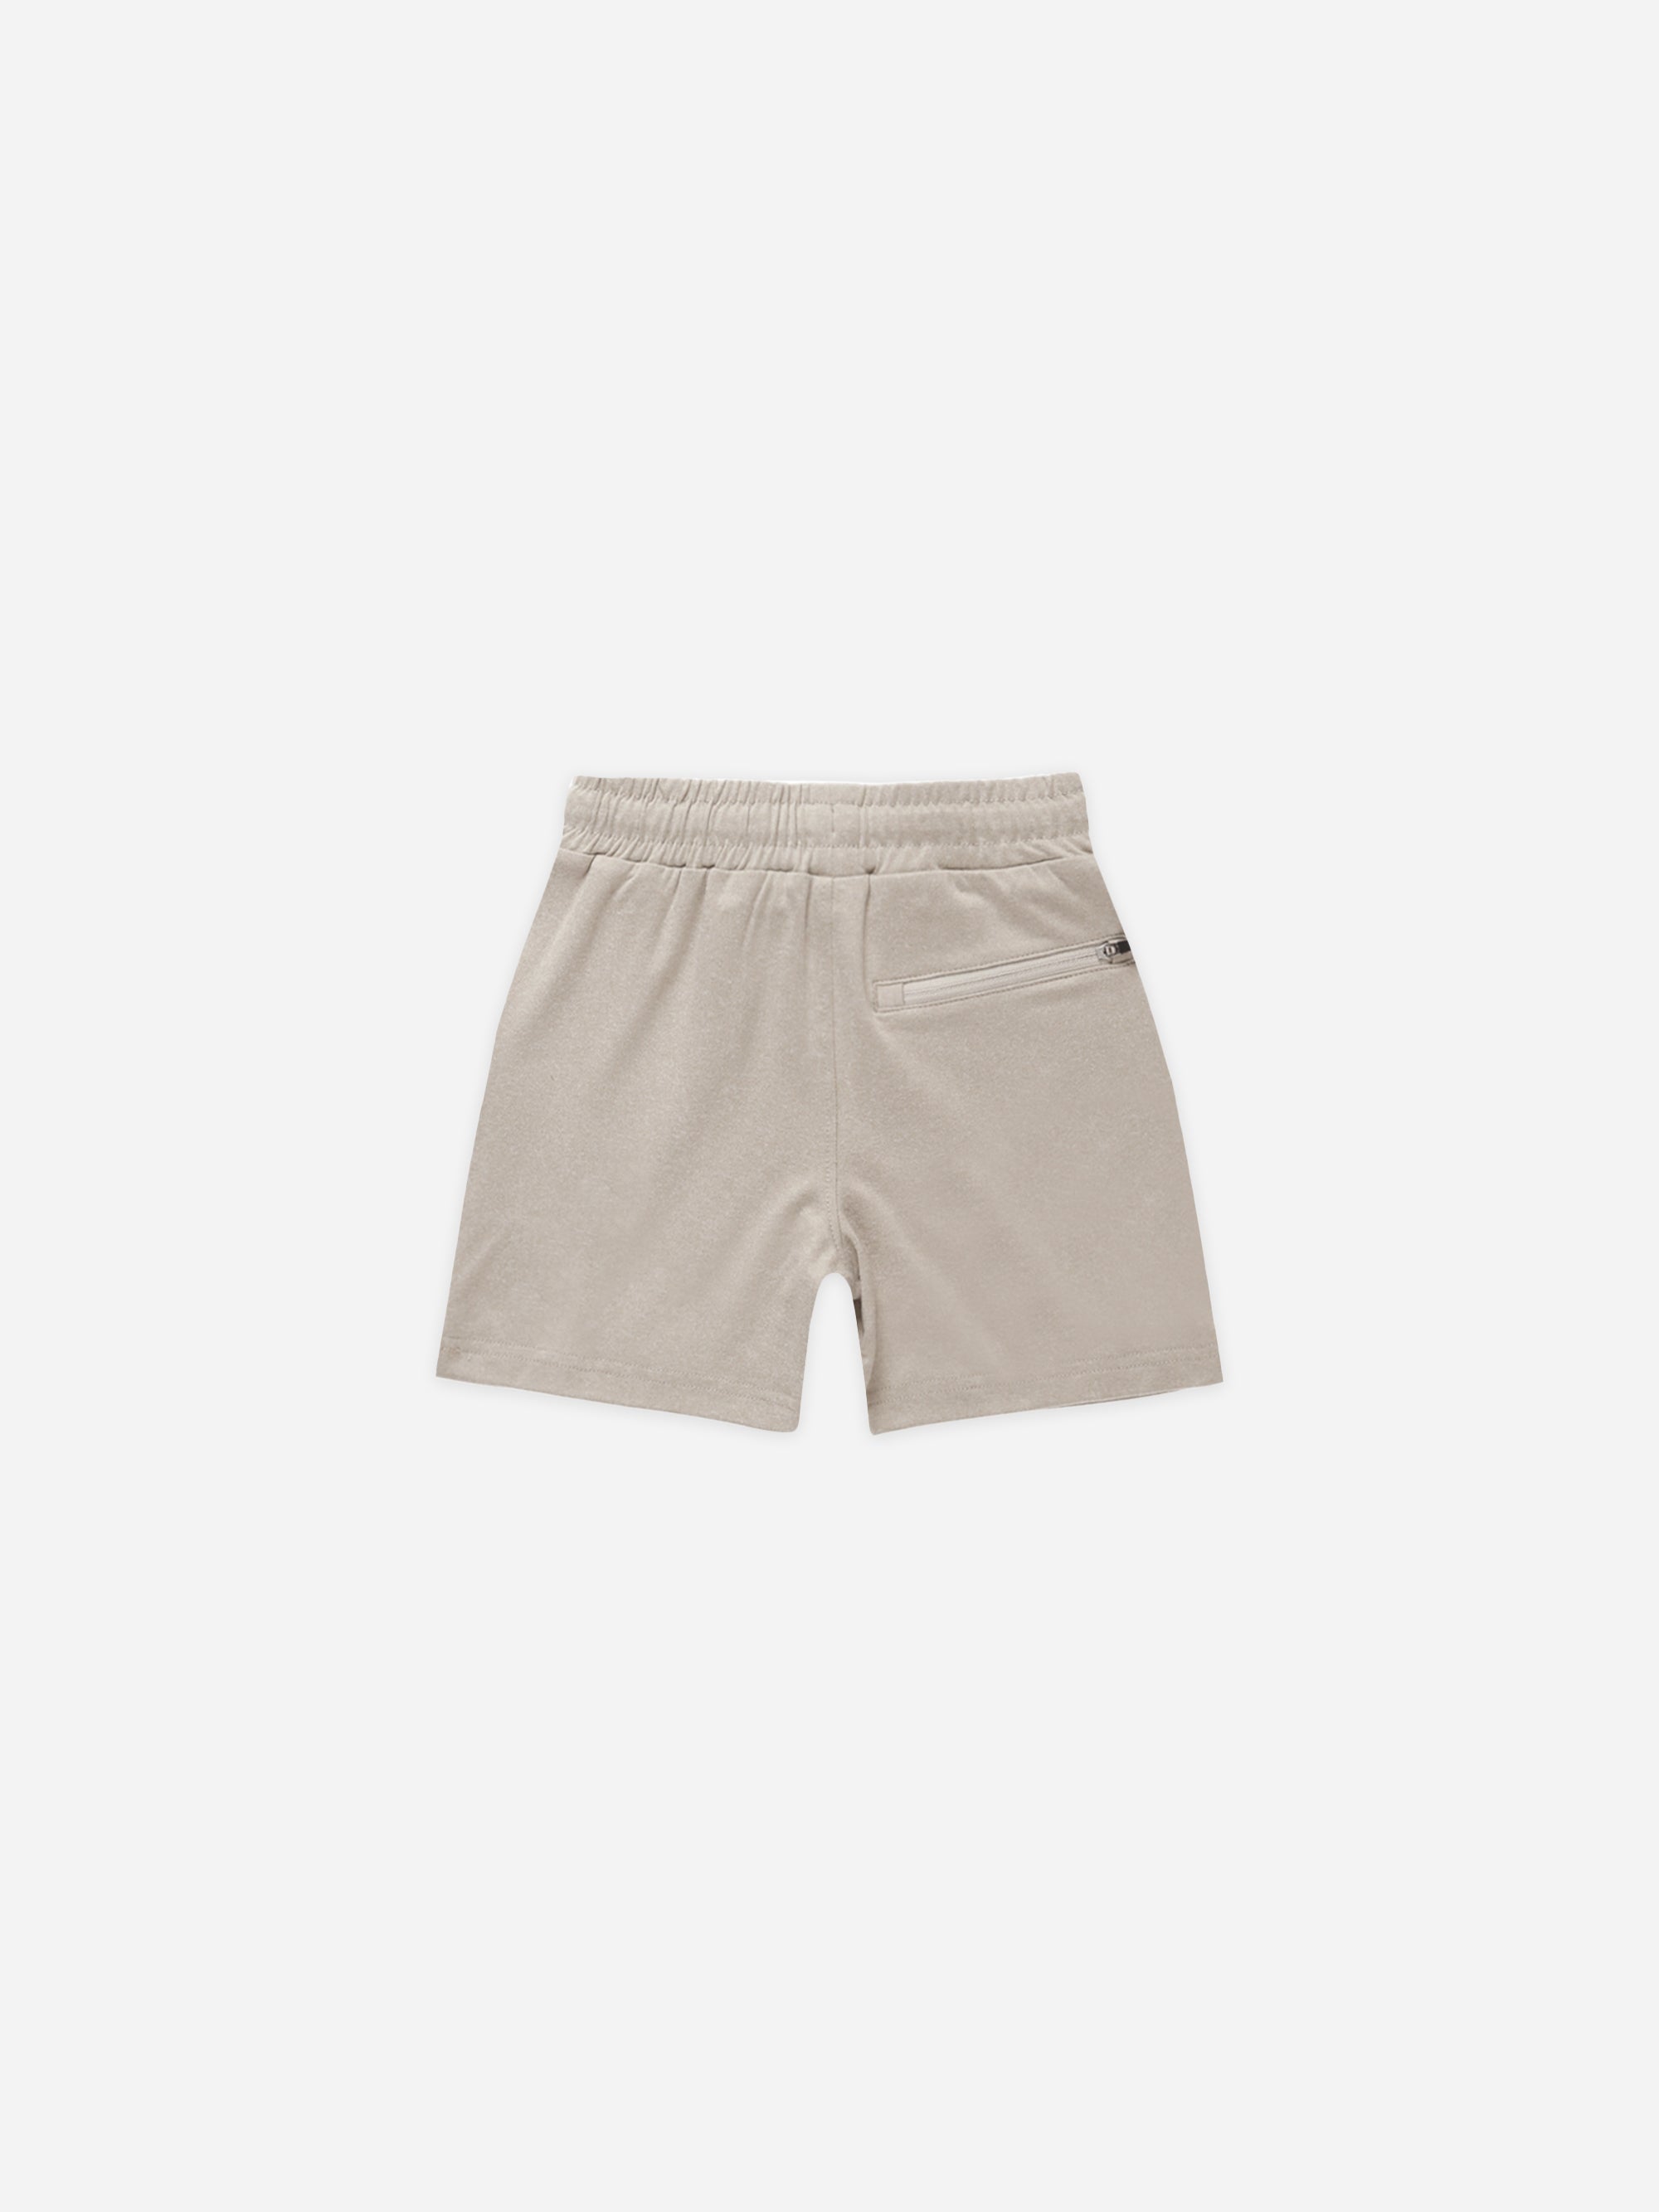 Oceanside Tech Short || Heathered Dove - Rylee + Cru | Kids Clothes | Trendy Baby Clothes | Modern Infant Outfits |